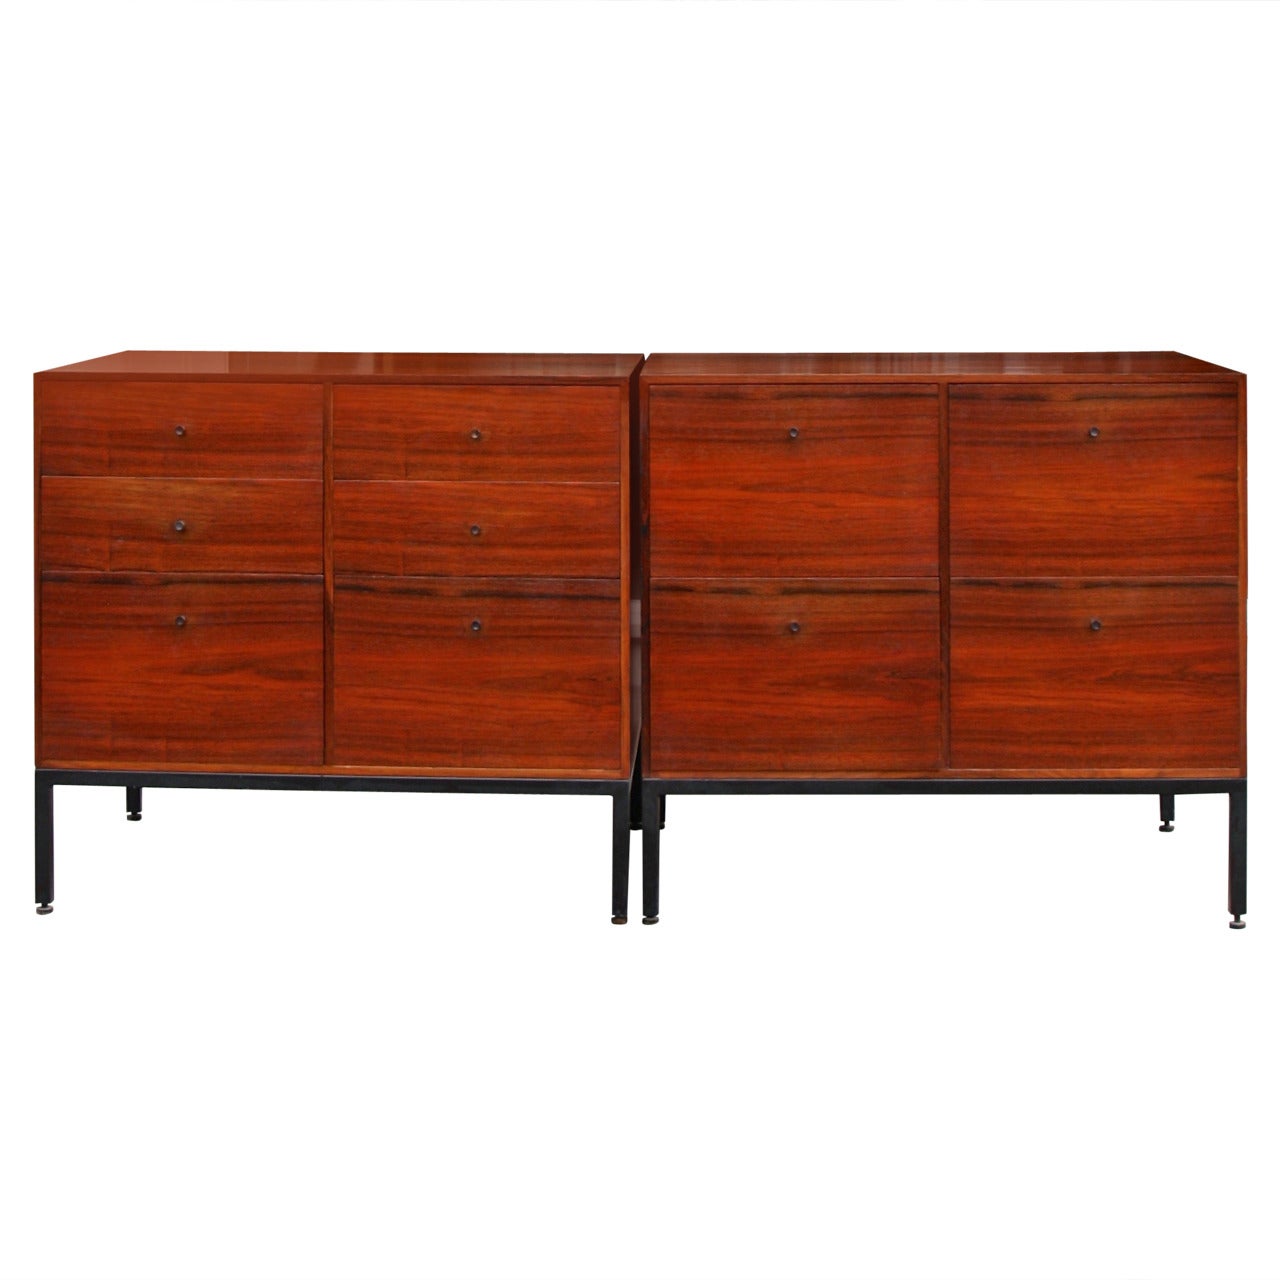 Mogens Koch Pair of Chests of Drawers